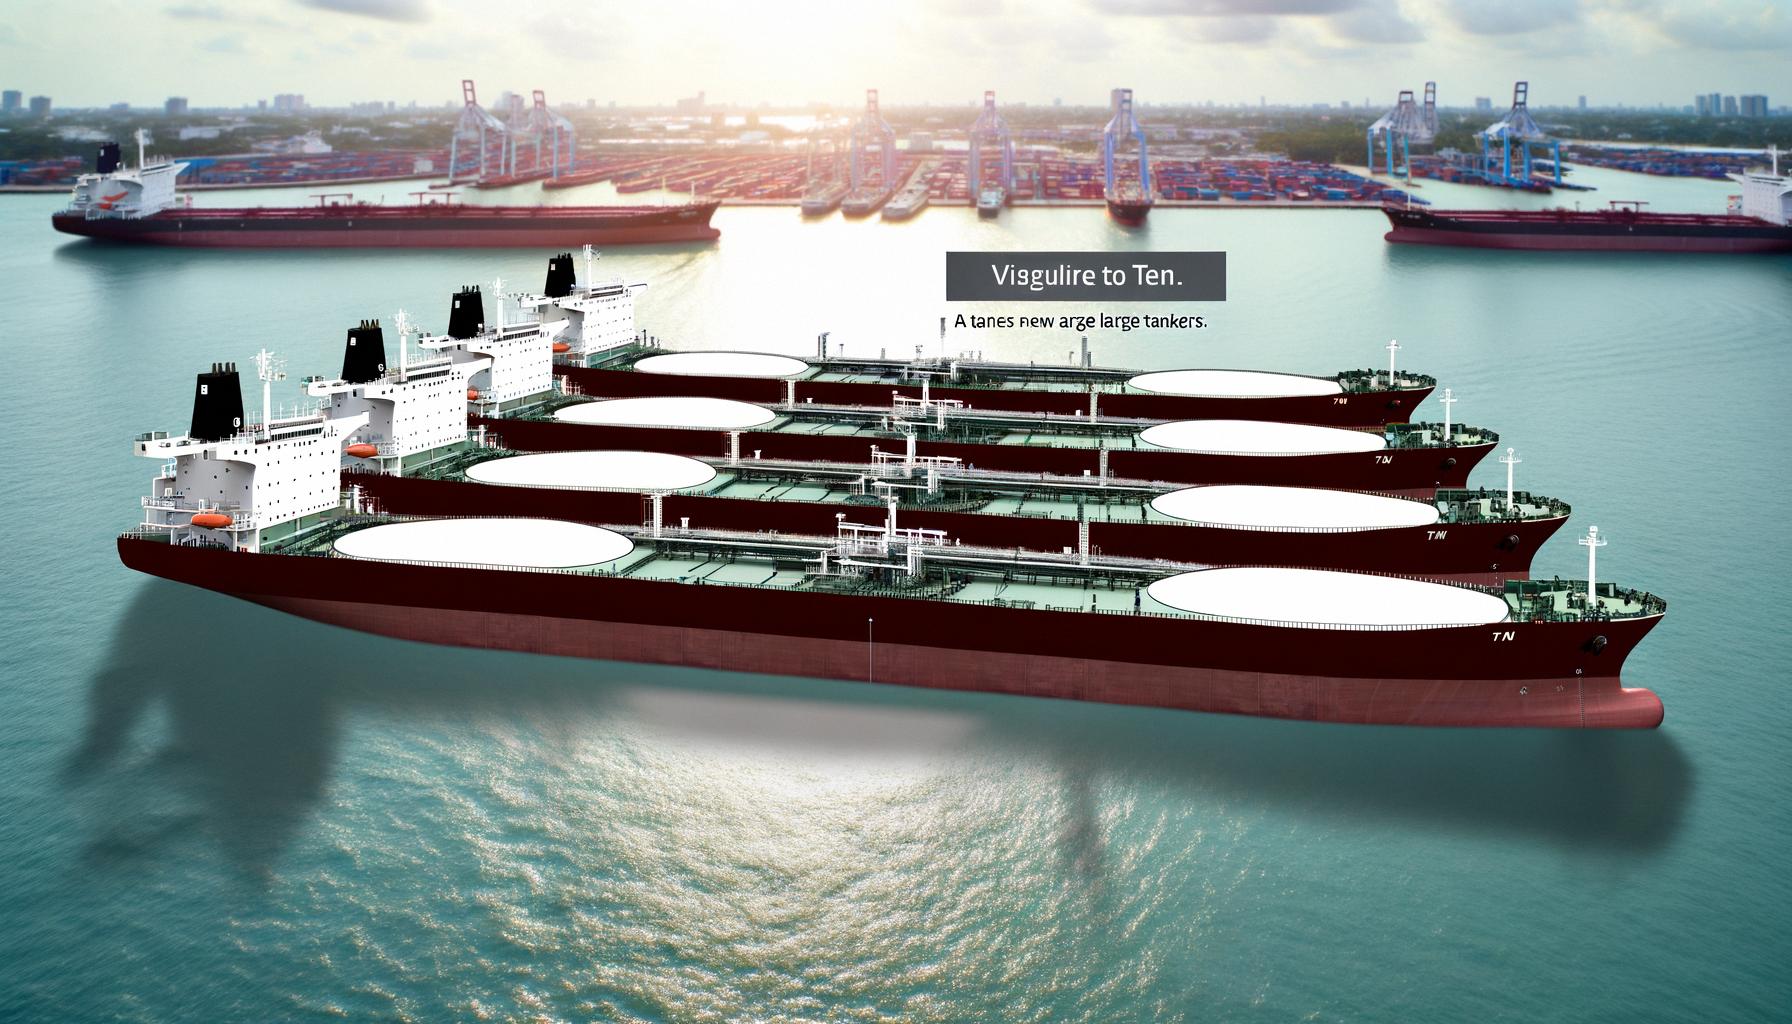 TEN to expand fleet with five new tankers Balanced News